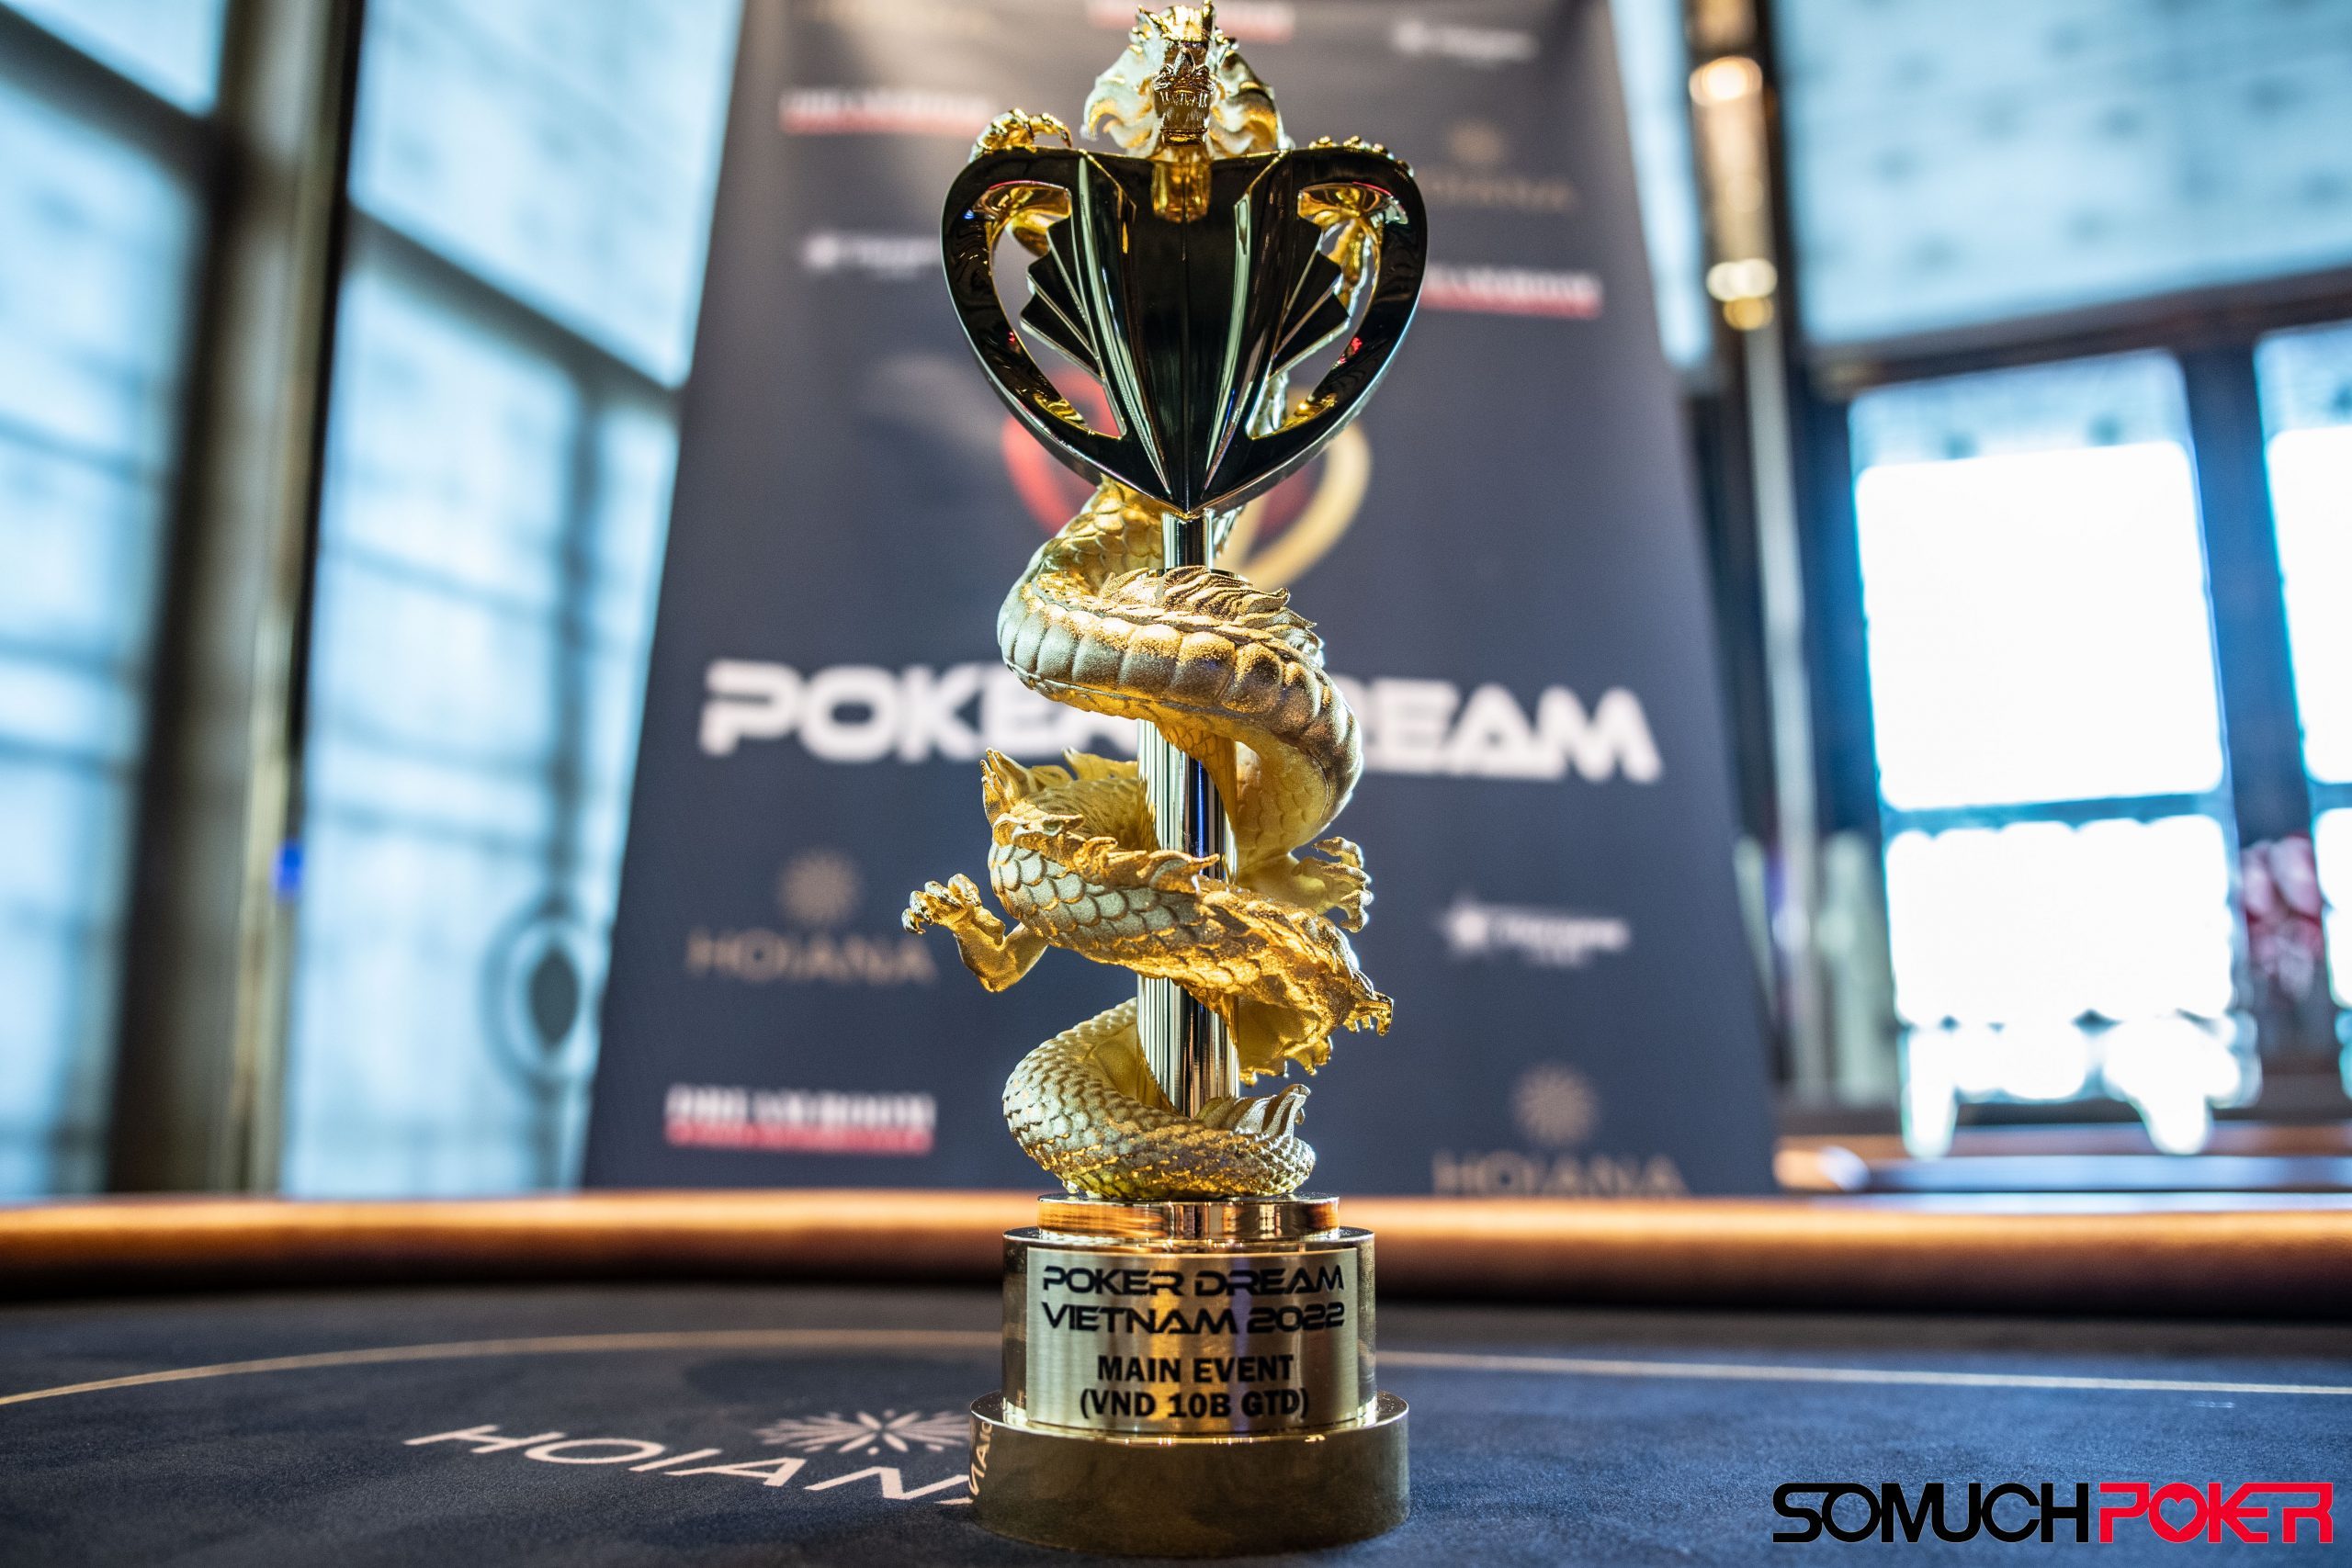 Poker Dream Vietnam Main Event champion to be crowned; two locals lead in the final 19 players